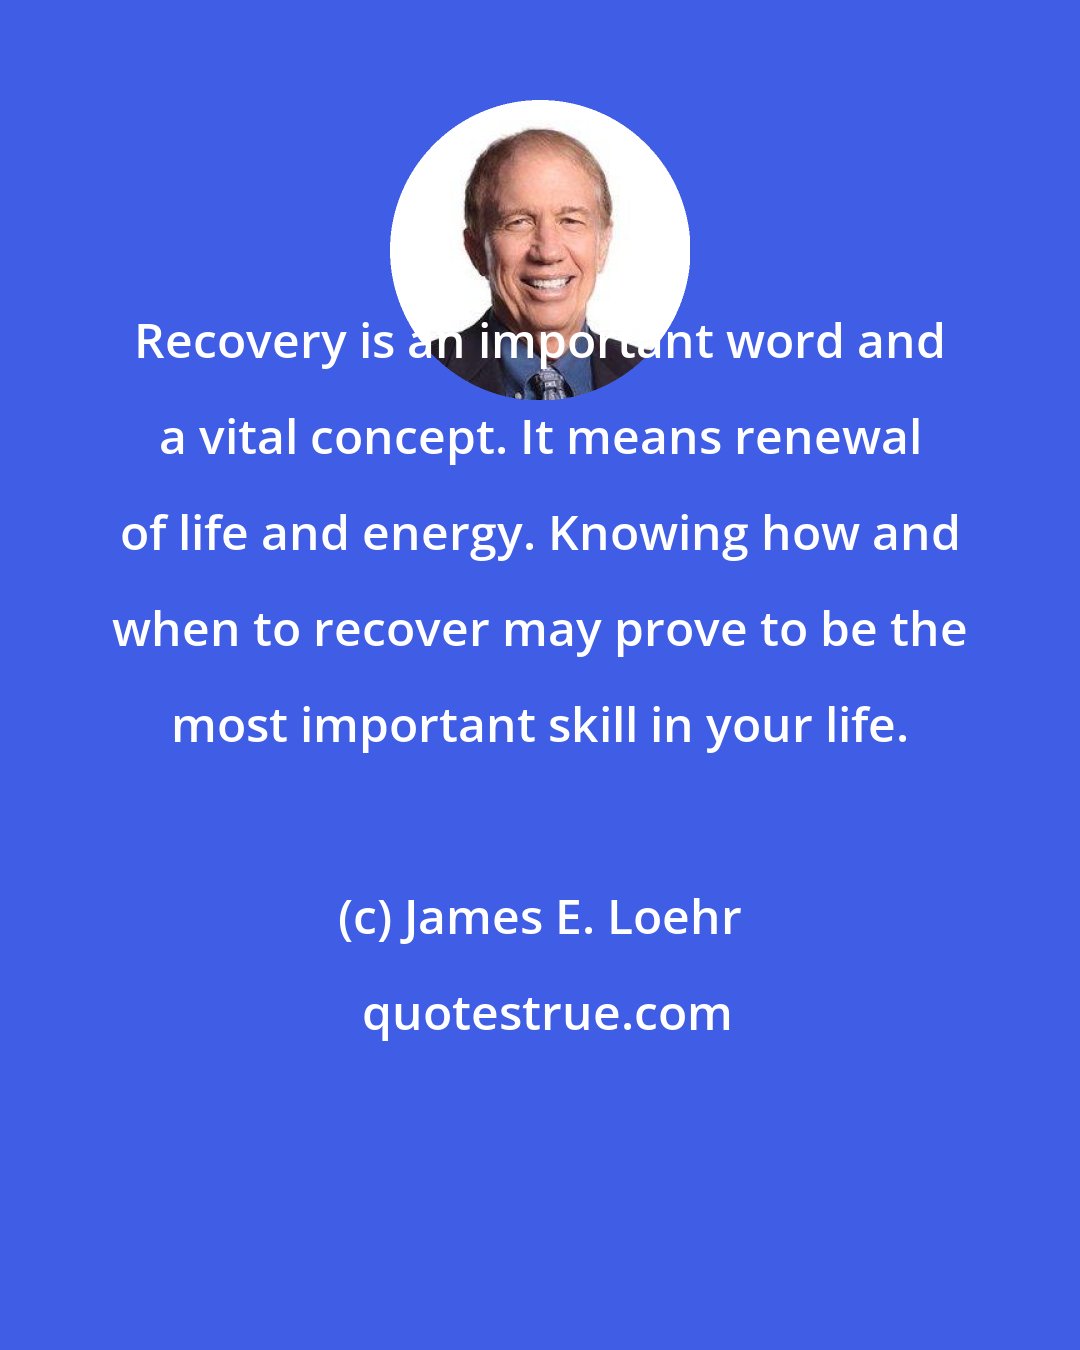 James E. Loehr: Recovery is an important word and a vital concept. It means renewal of life and energy. Knowing how and when to recover may prove to be the most important skill in your life.